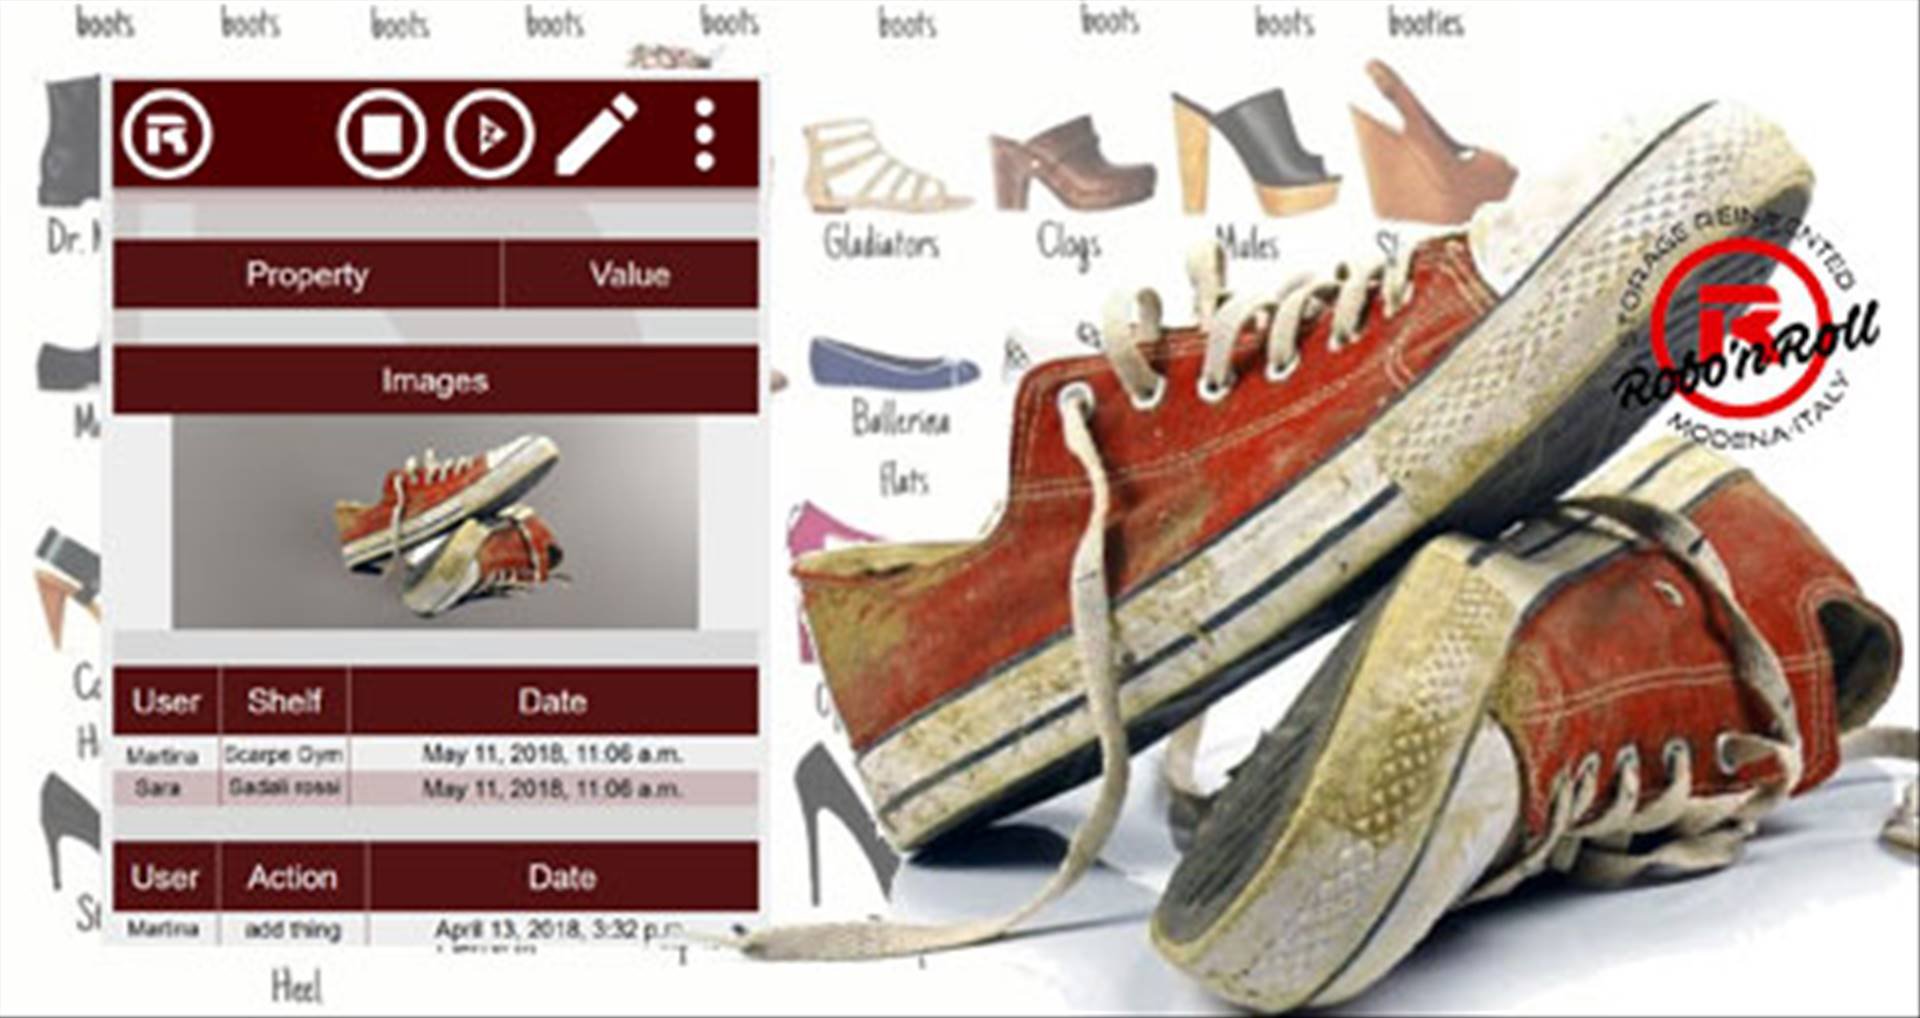 Thanks to Robo's APPlication finding your long forgotten shoes is as easy as taking a picture.